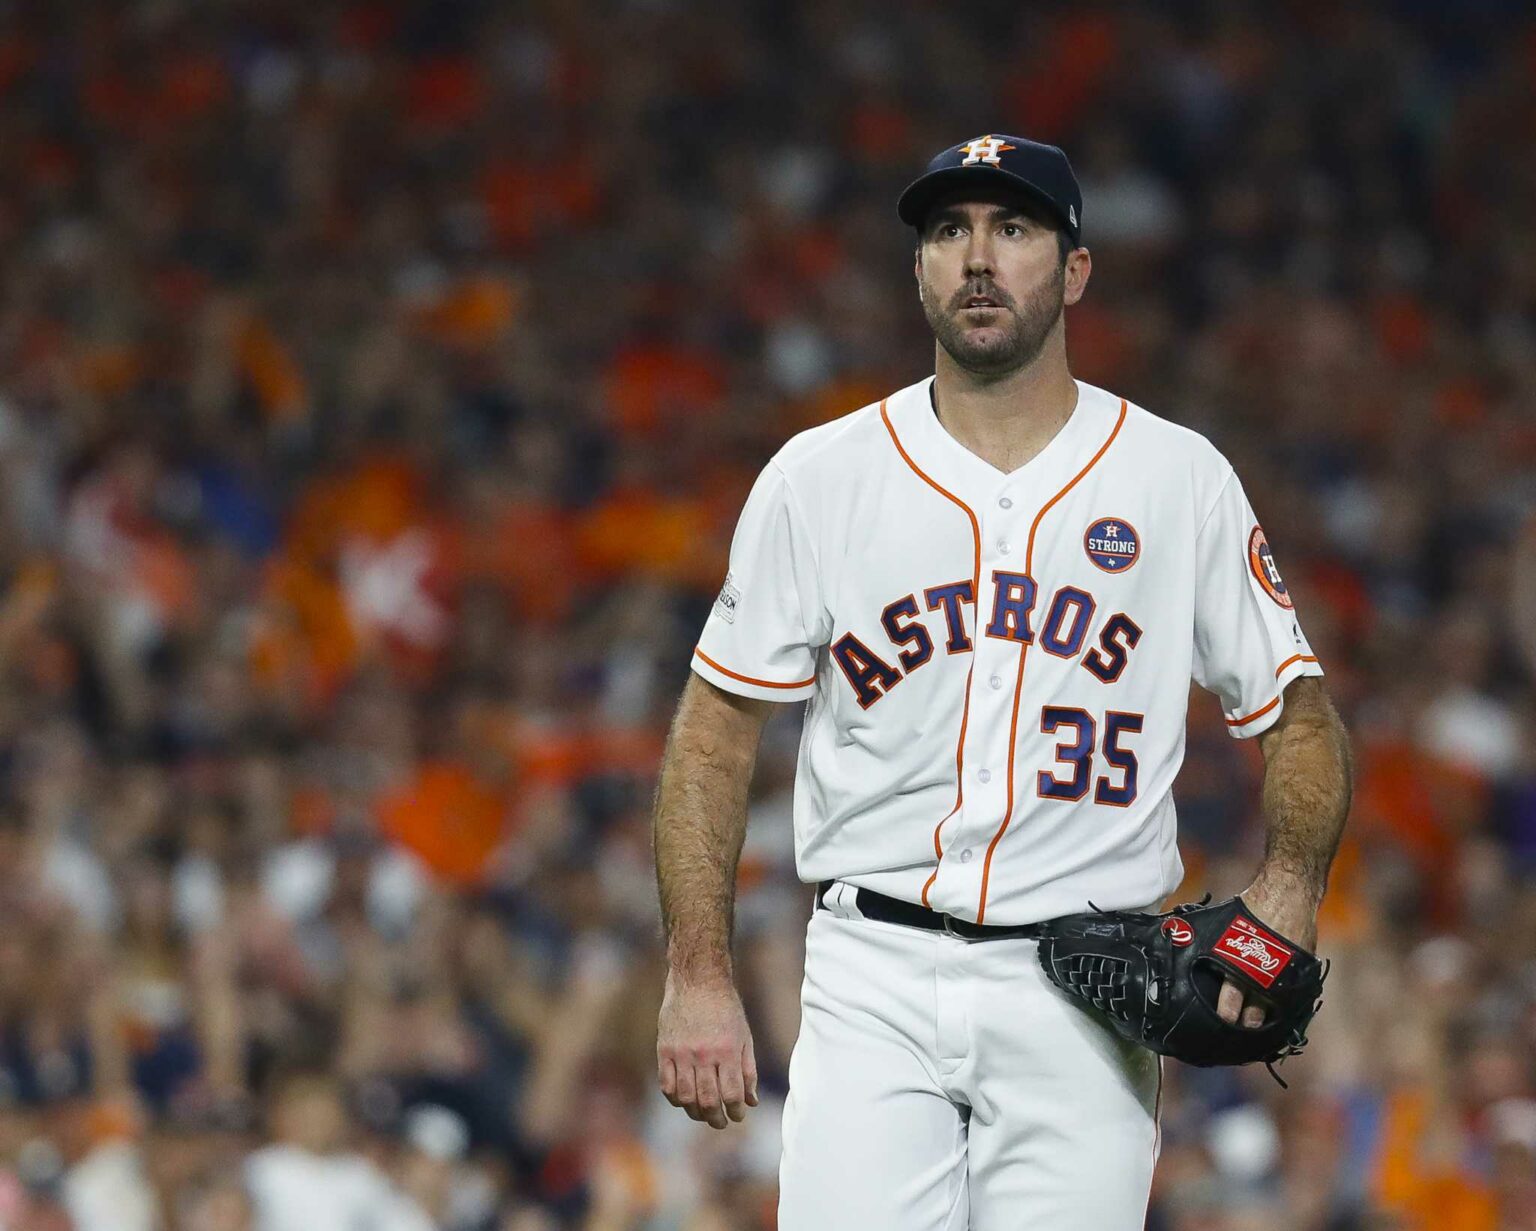 Phillies vs Astros Prediction, Starting Pitchers and MLB Betting Odds for World Series Game 1